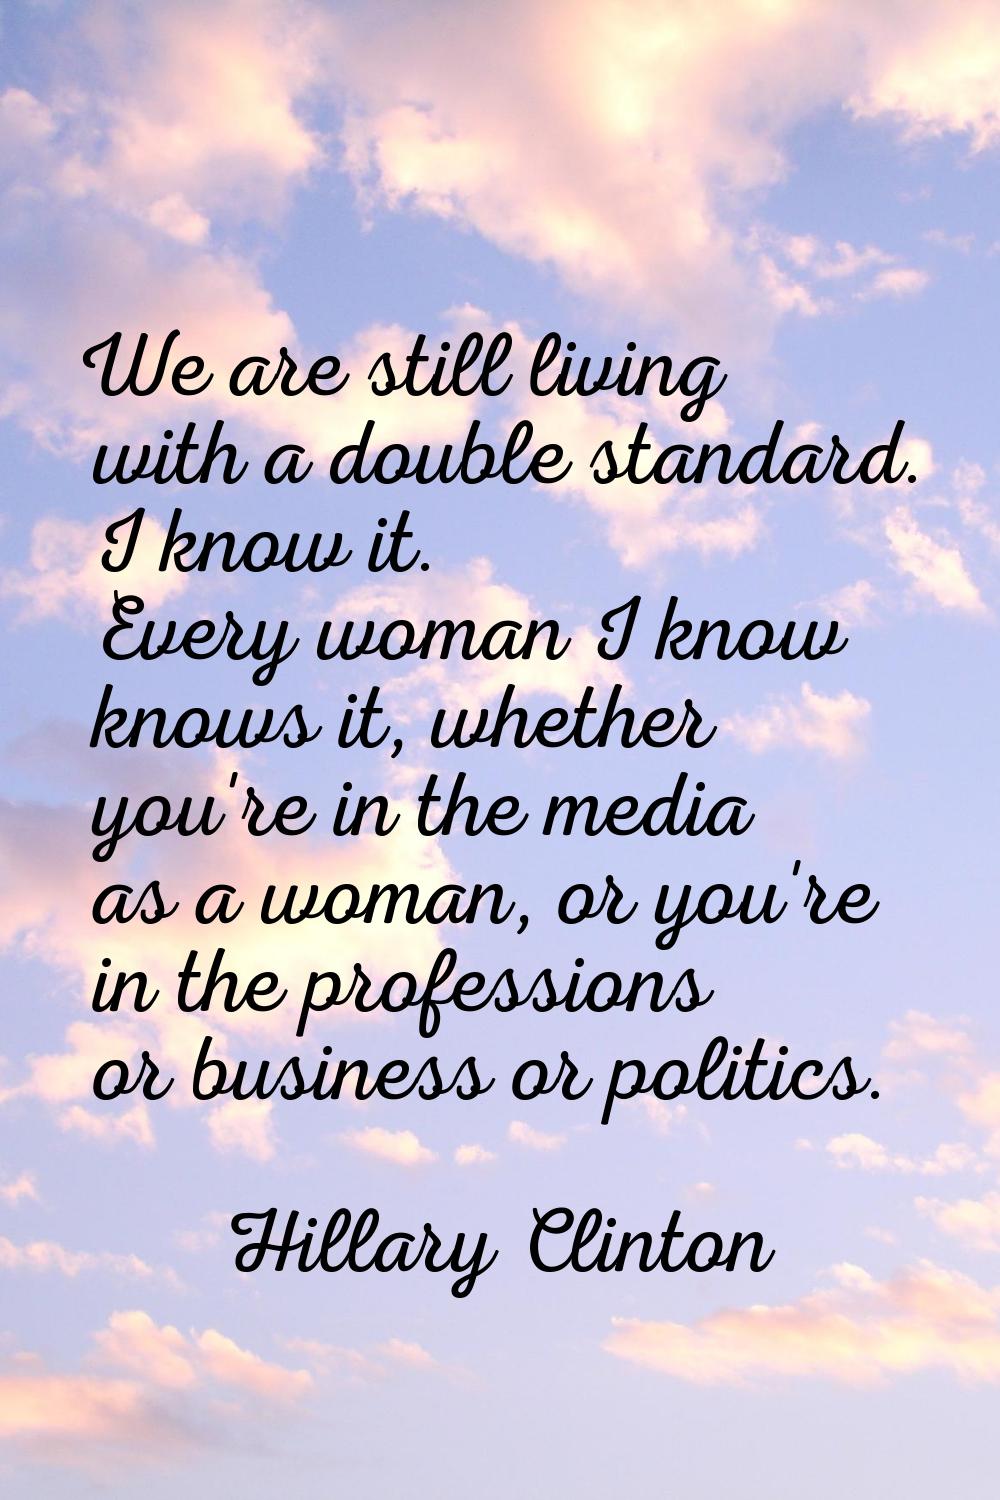 We are still living with a double standard. I know it. Every woman I know knows it, whether you're 